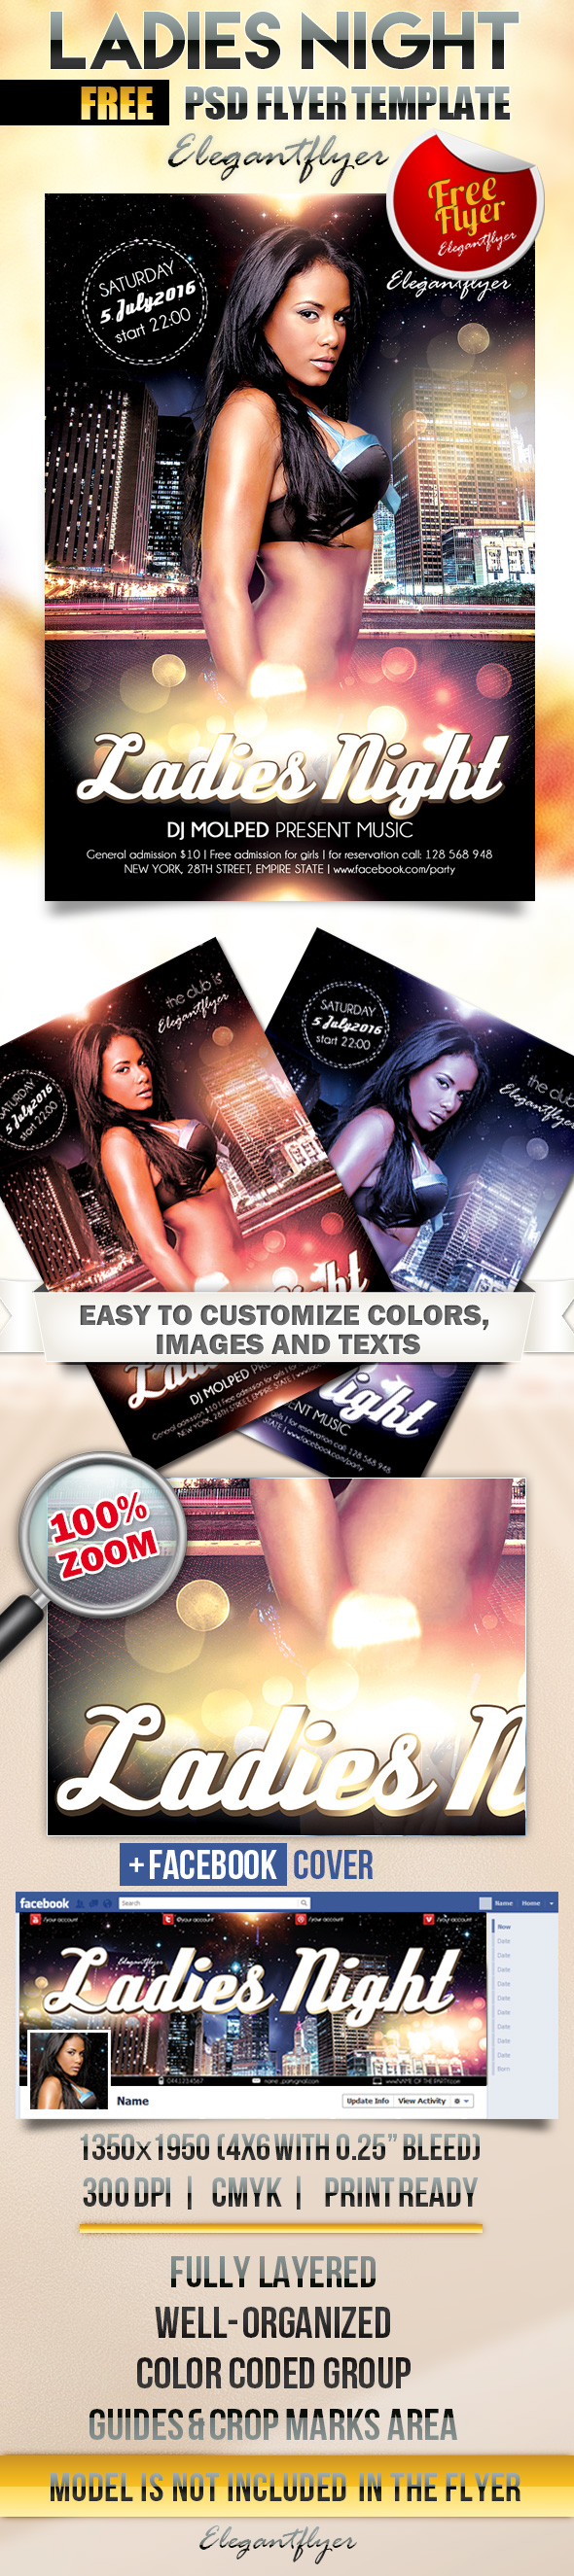 Probably Free Ladies Night Flyer Template PSD